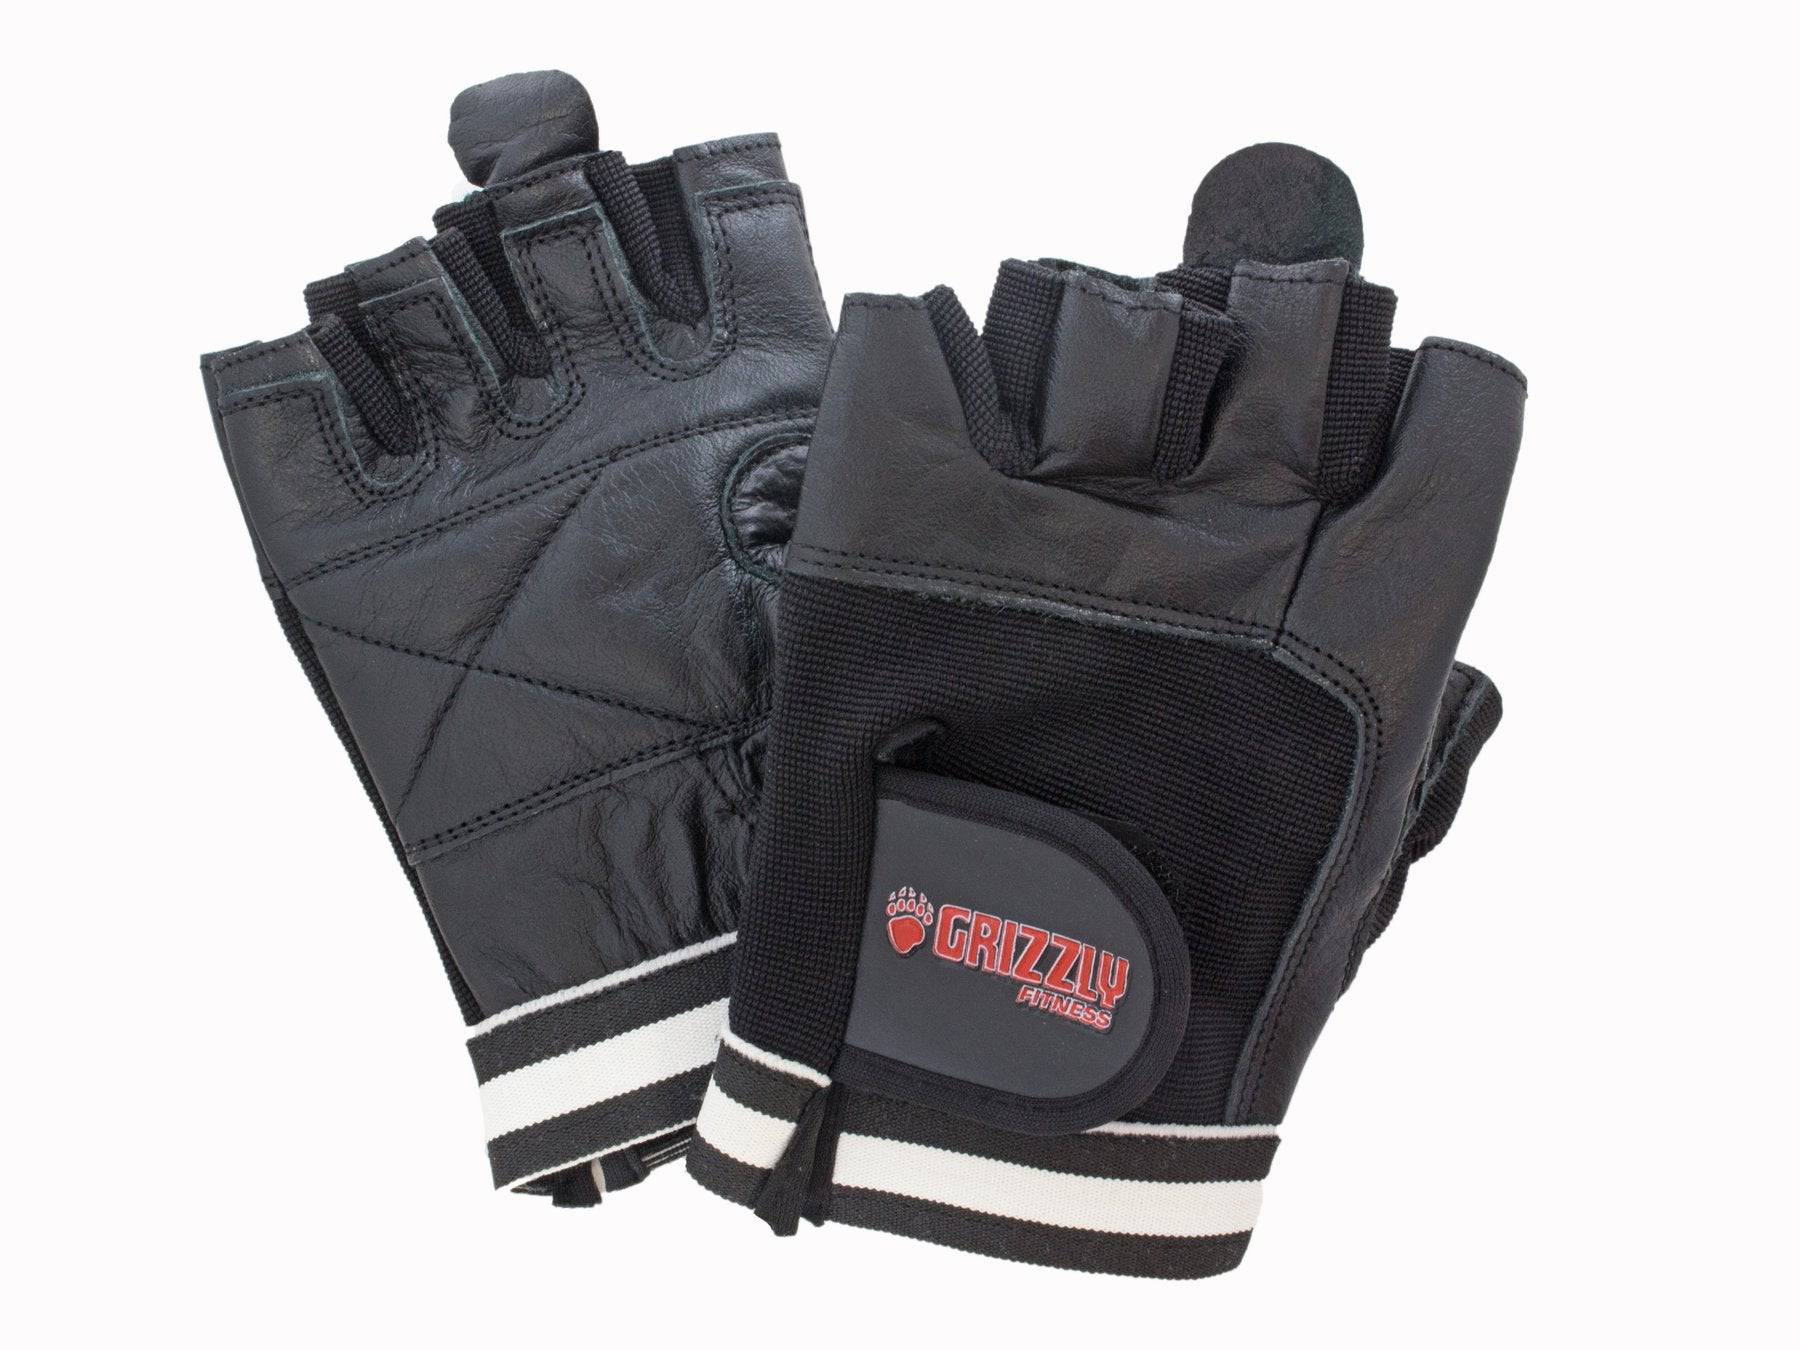 Grizzly Fitness | Grizzly Paws - Leather Training Gloves - XTC Fitness - Exercise Equipment Superstore - Canada - Exercise Gloves